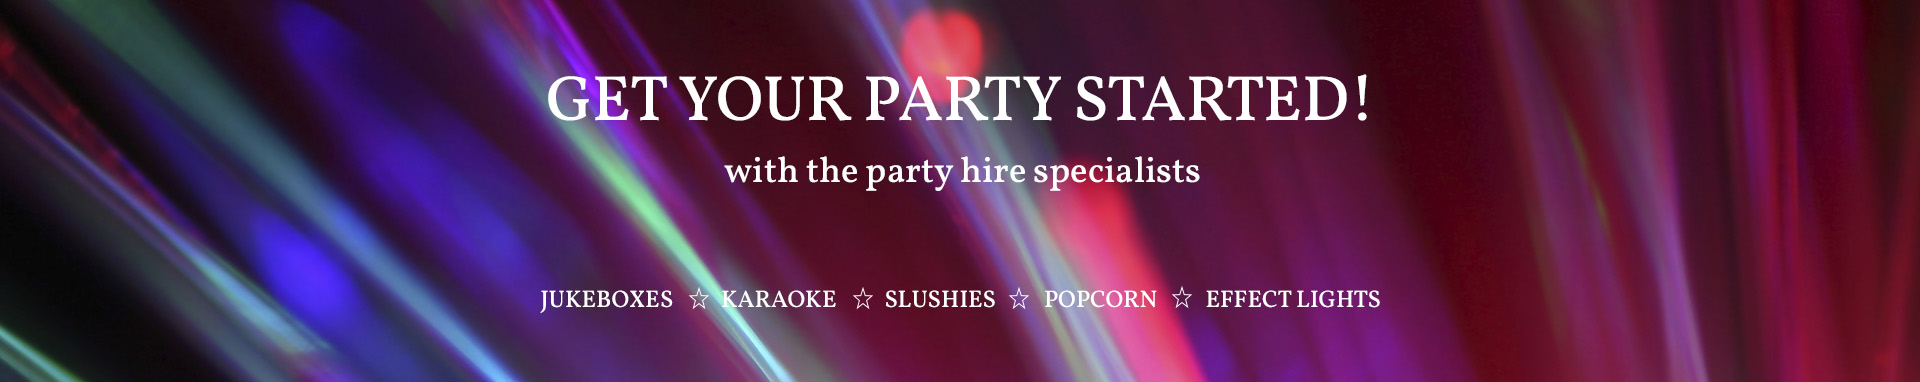 get your party started